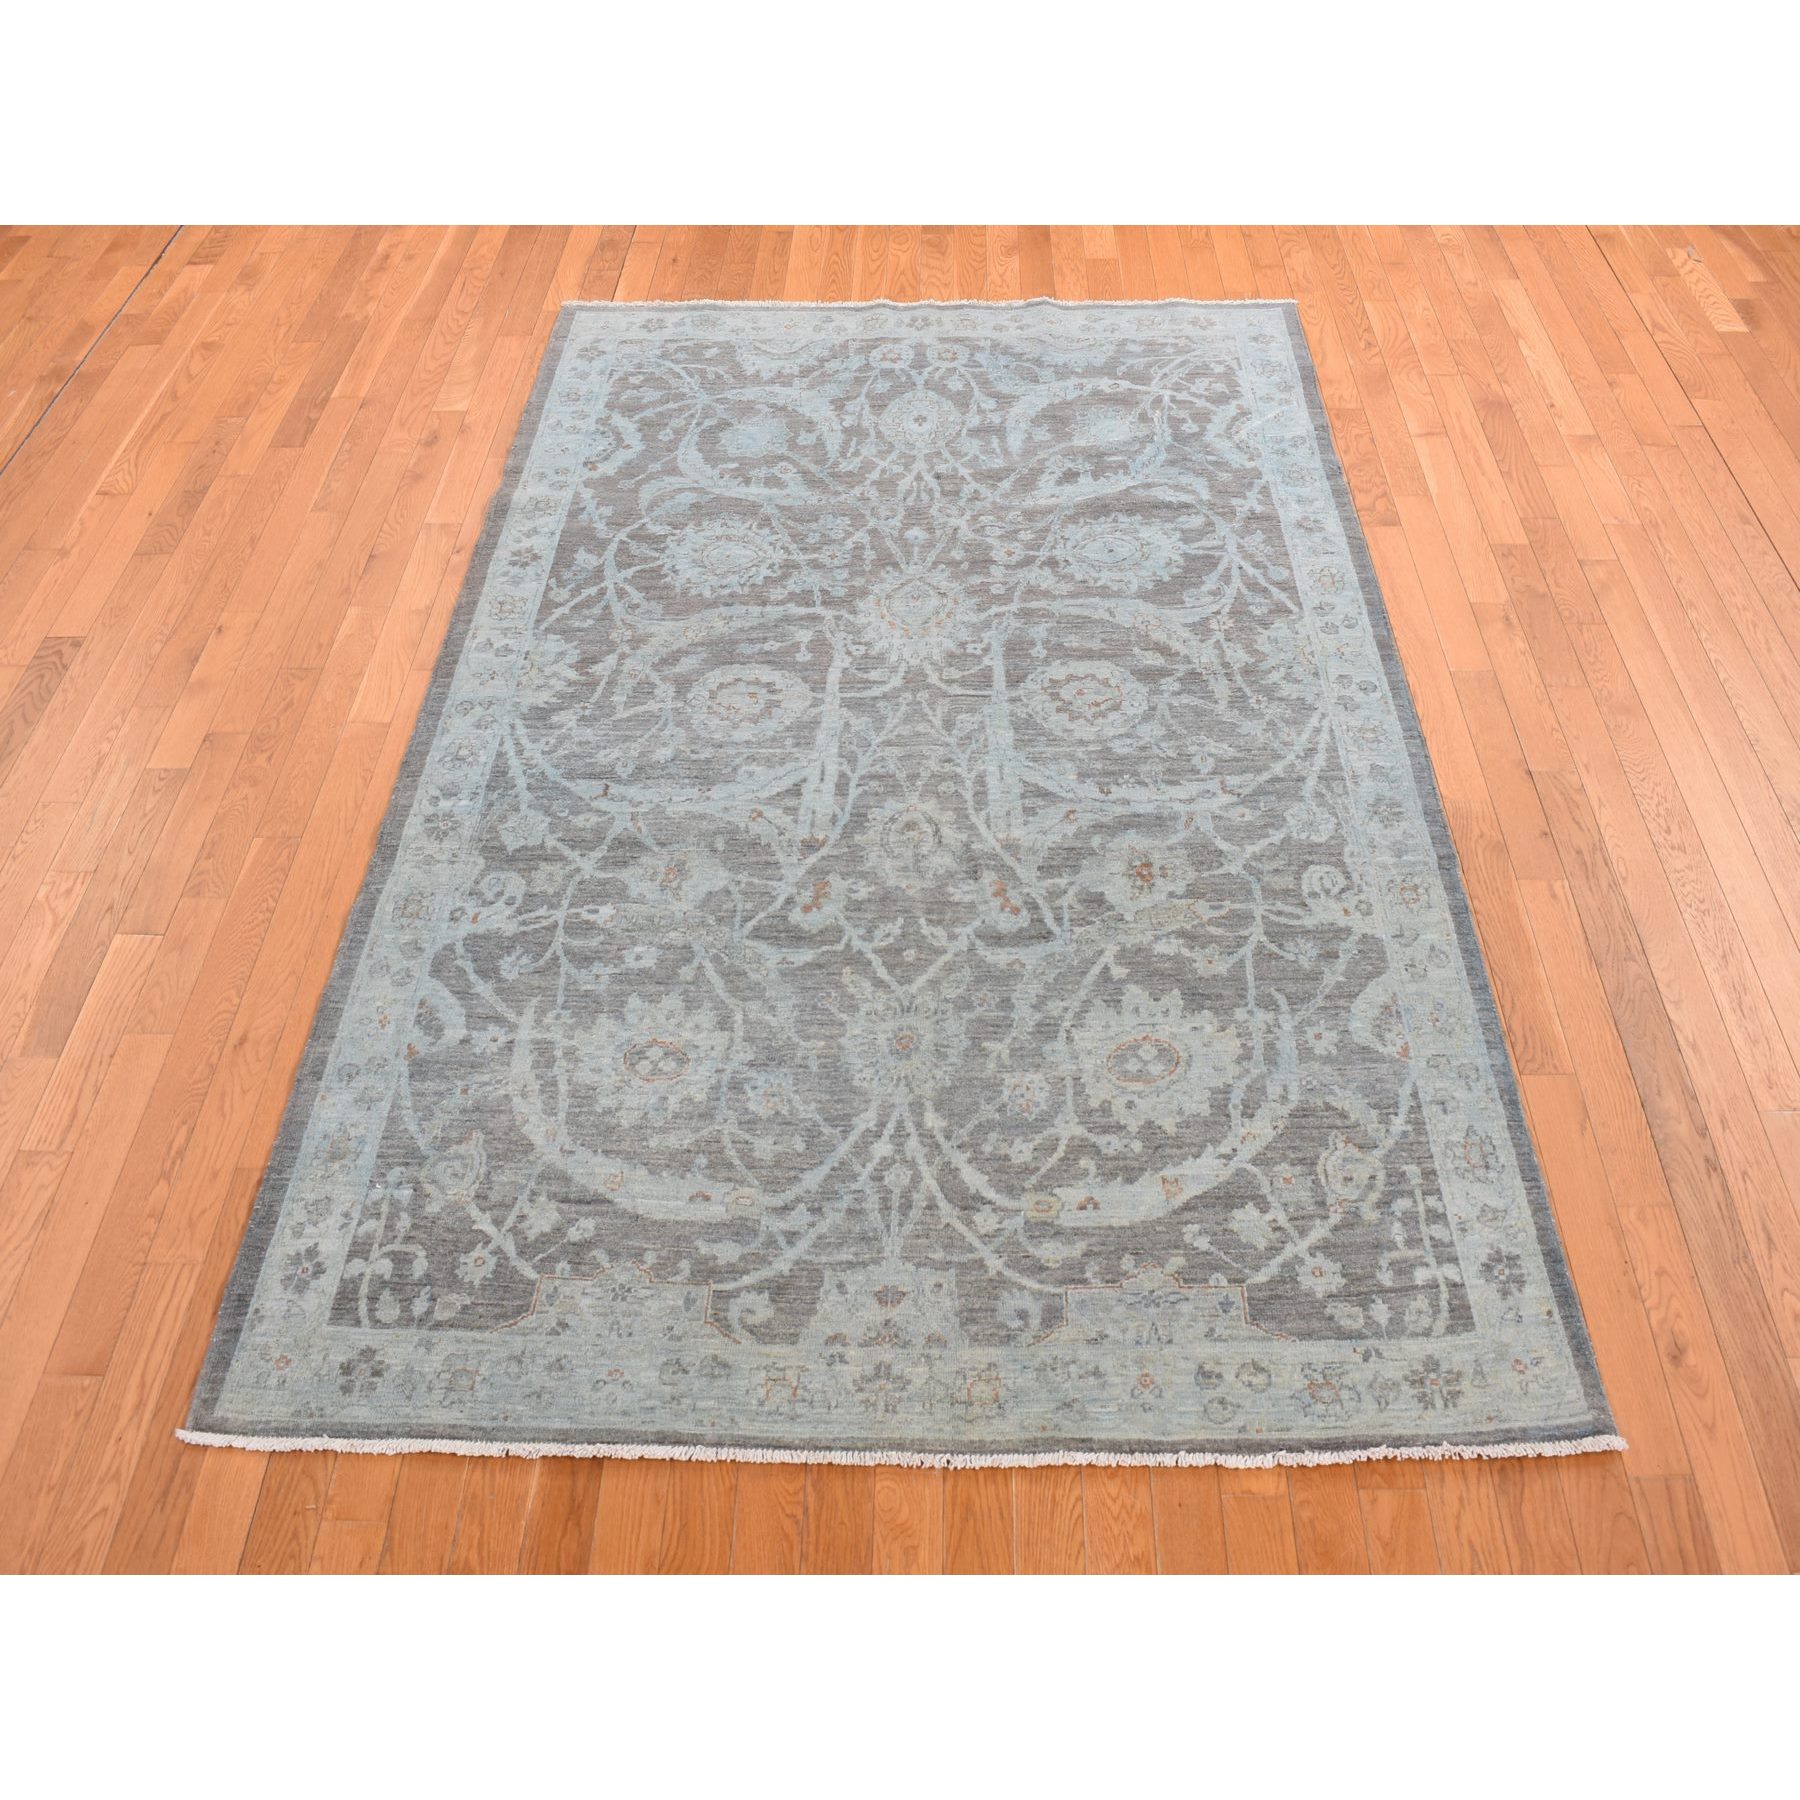  Wool Hand-Knotted Area Rug 5'9